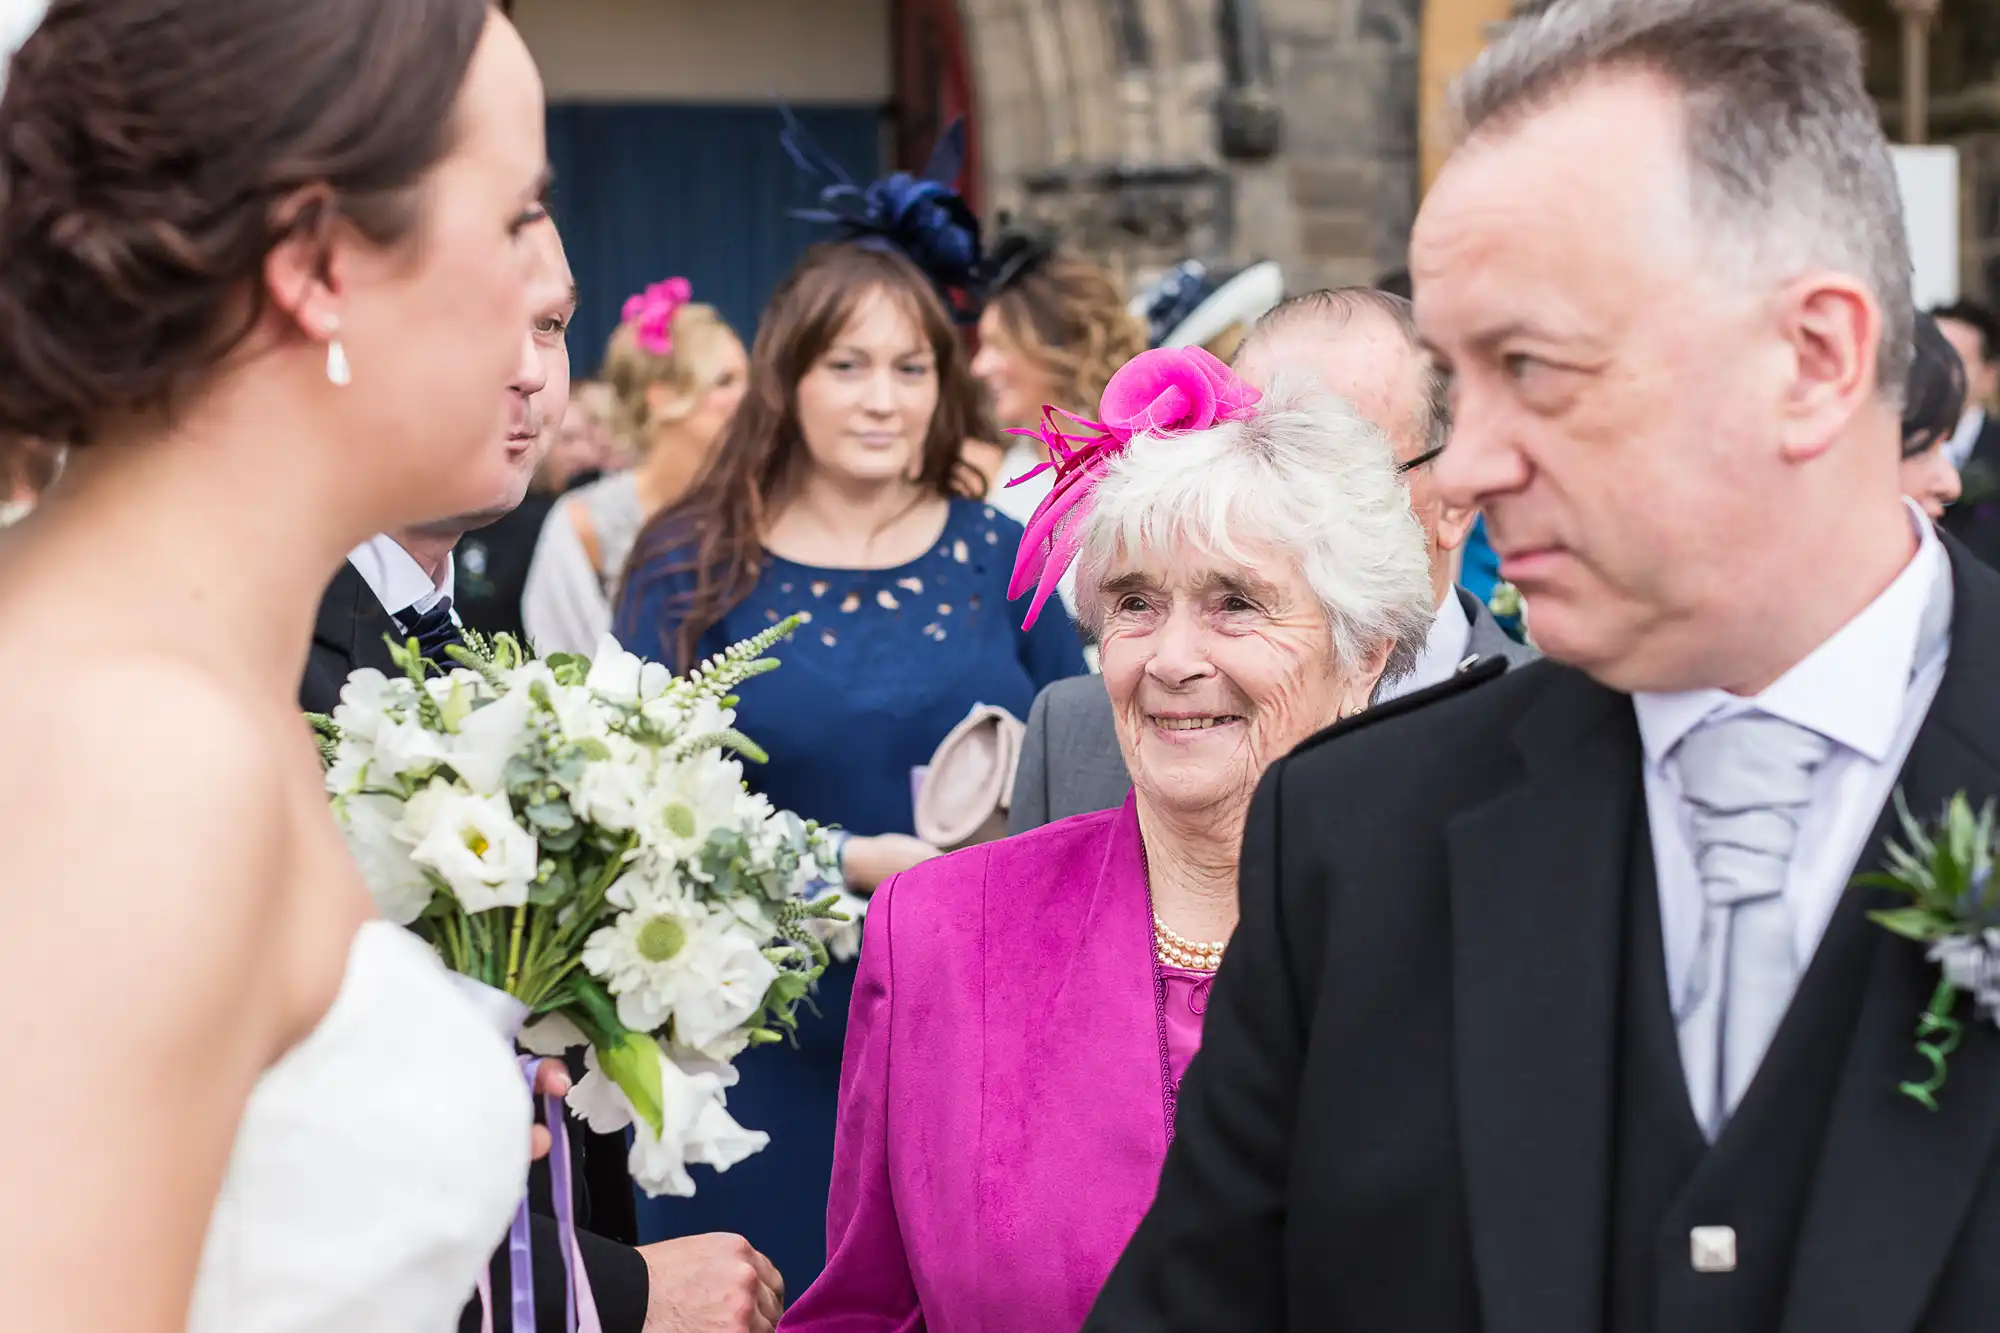 Bride holding a bouquet converses with an elderly woman in a pink hat and a man in a suit, with other guests in the background.